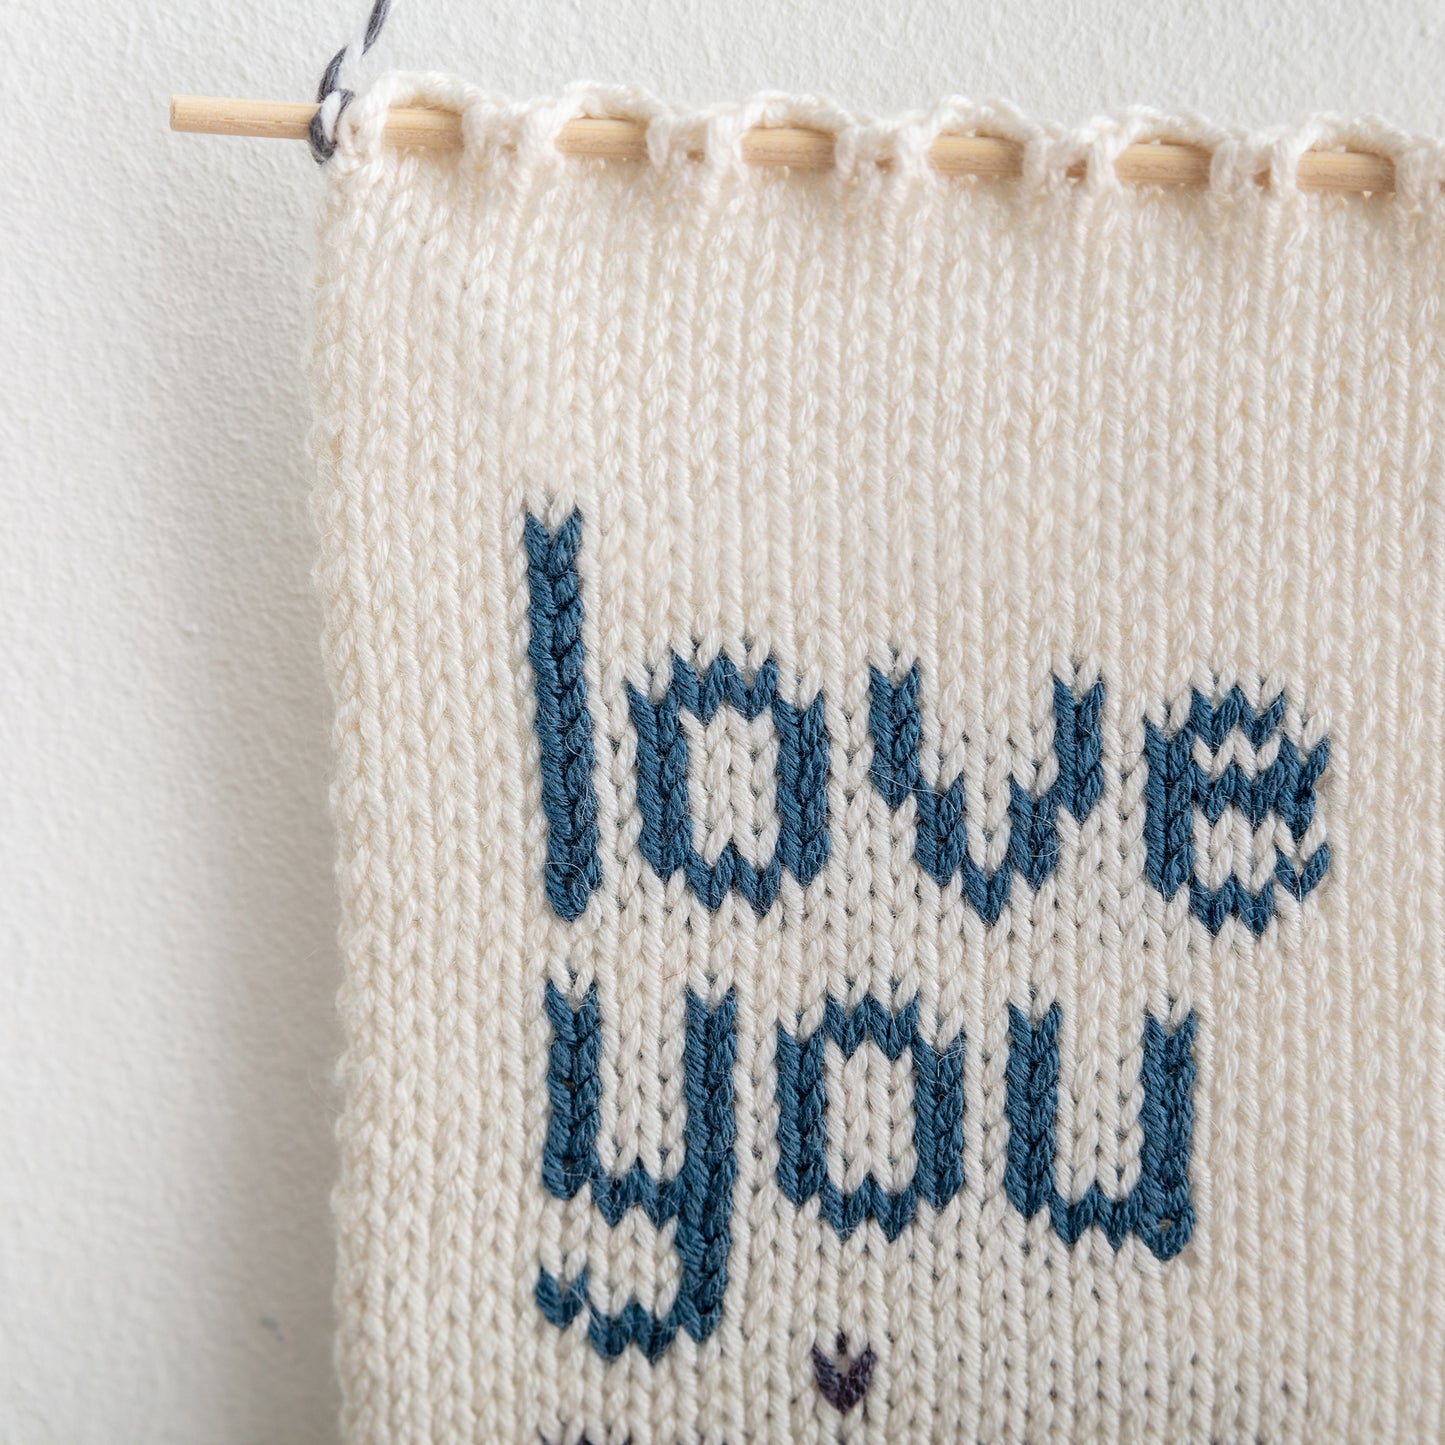 'Love You Miss You' Knitted Wall Art